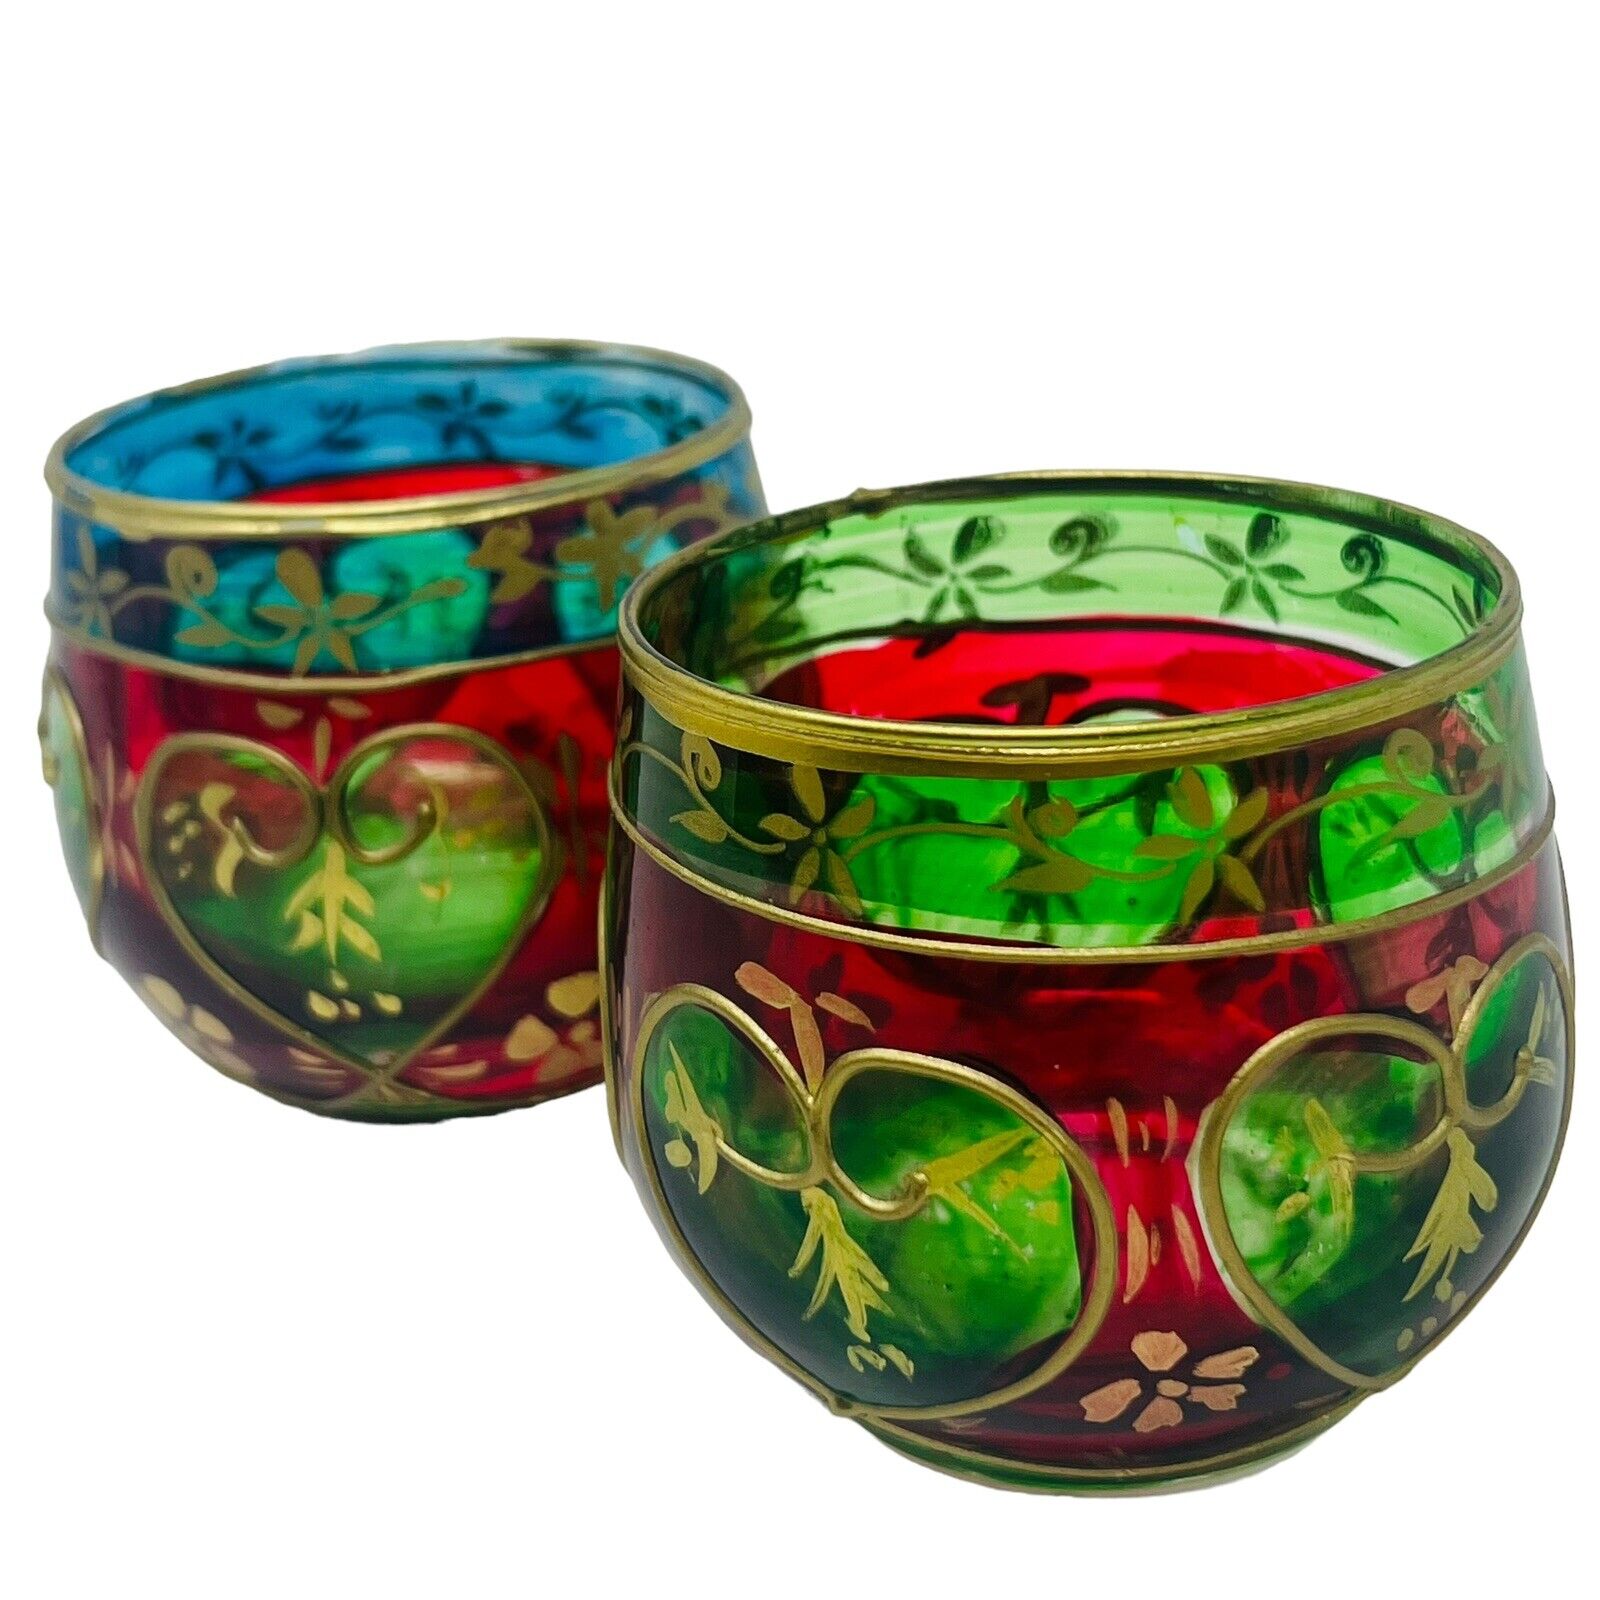 Set 2 Vintage Hand Painted Stained Glass Tea Lights Votives Colorful Whimsical